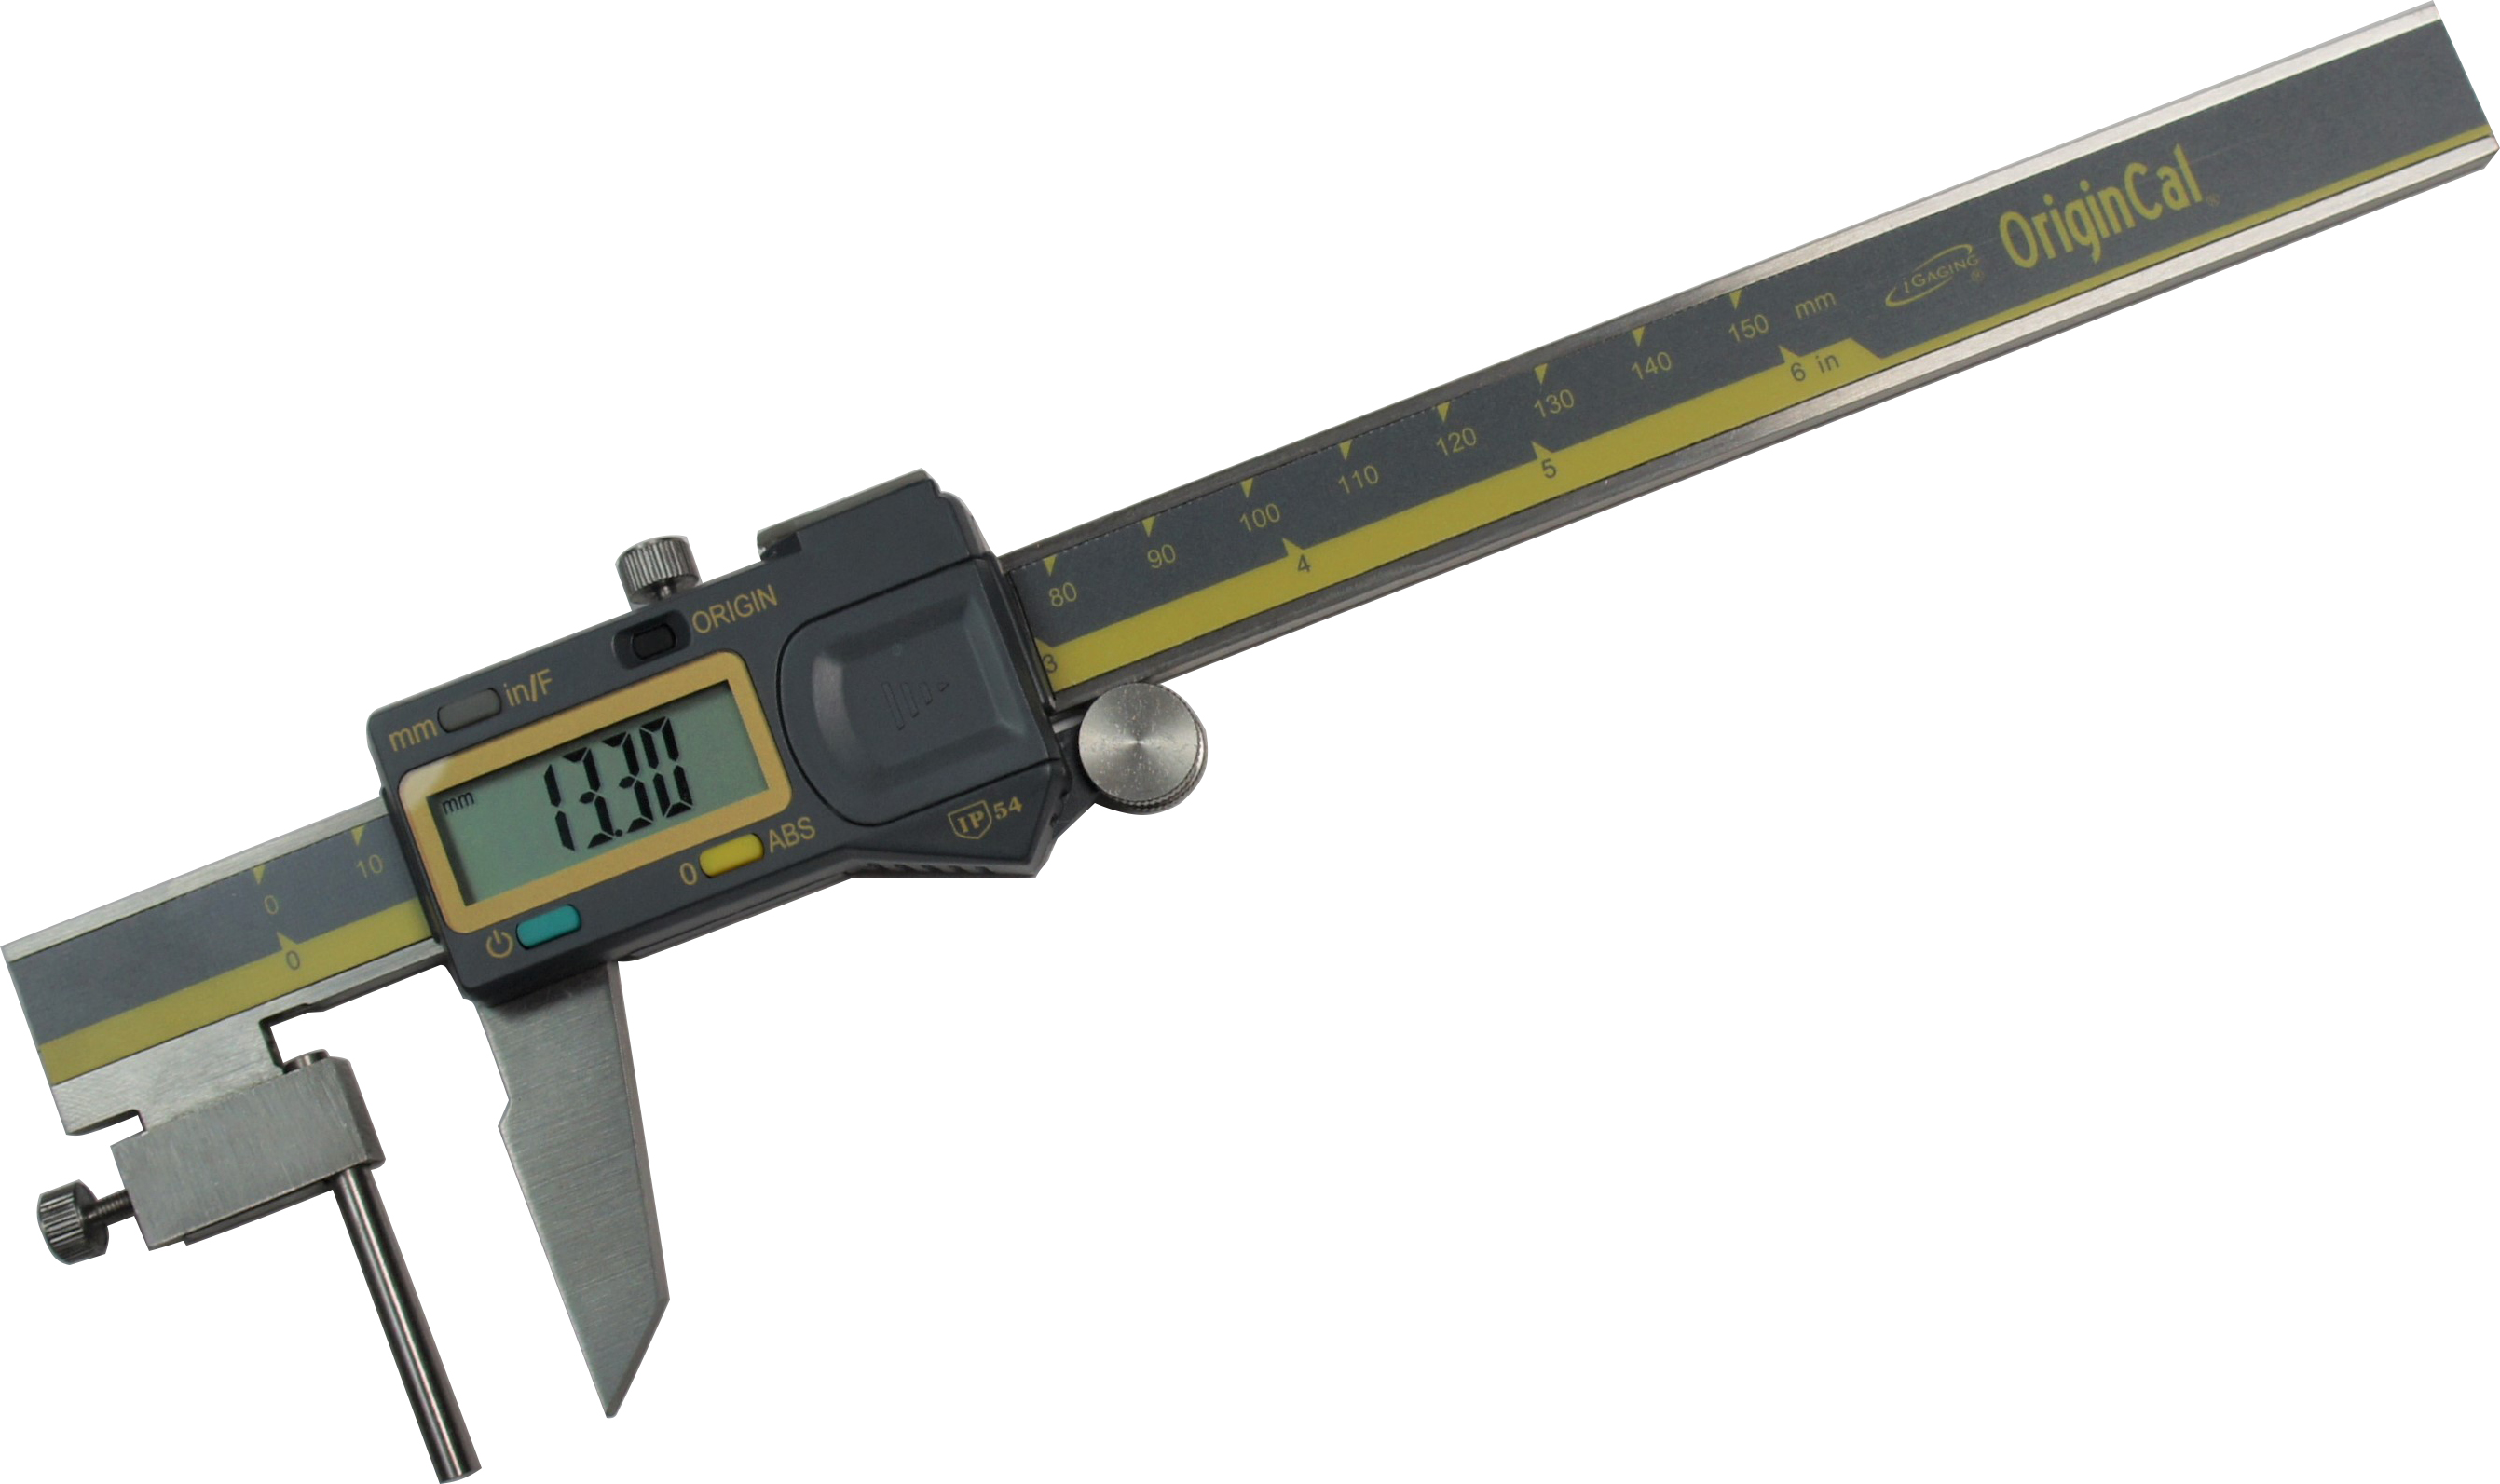 iGaging 100-700-36 Digital Pipe/Tube Thickness Caliper, Absolute Inch/mm/Fraction